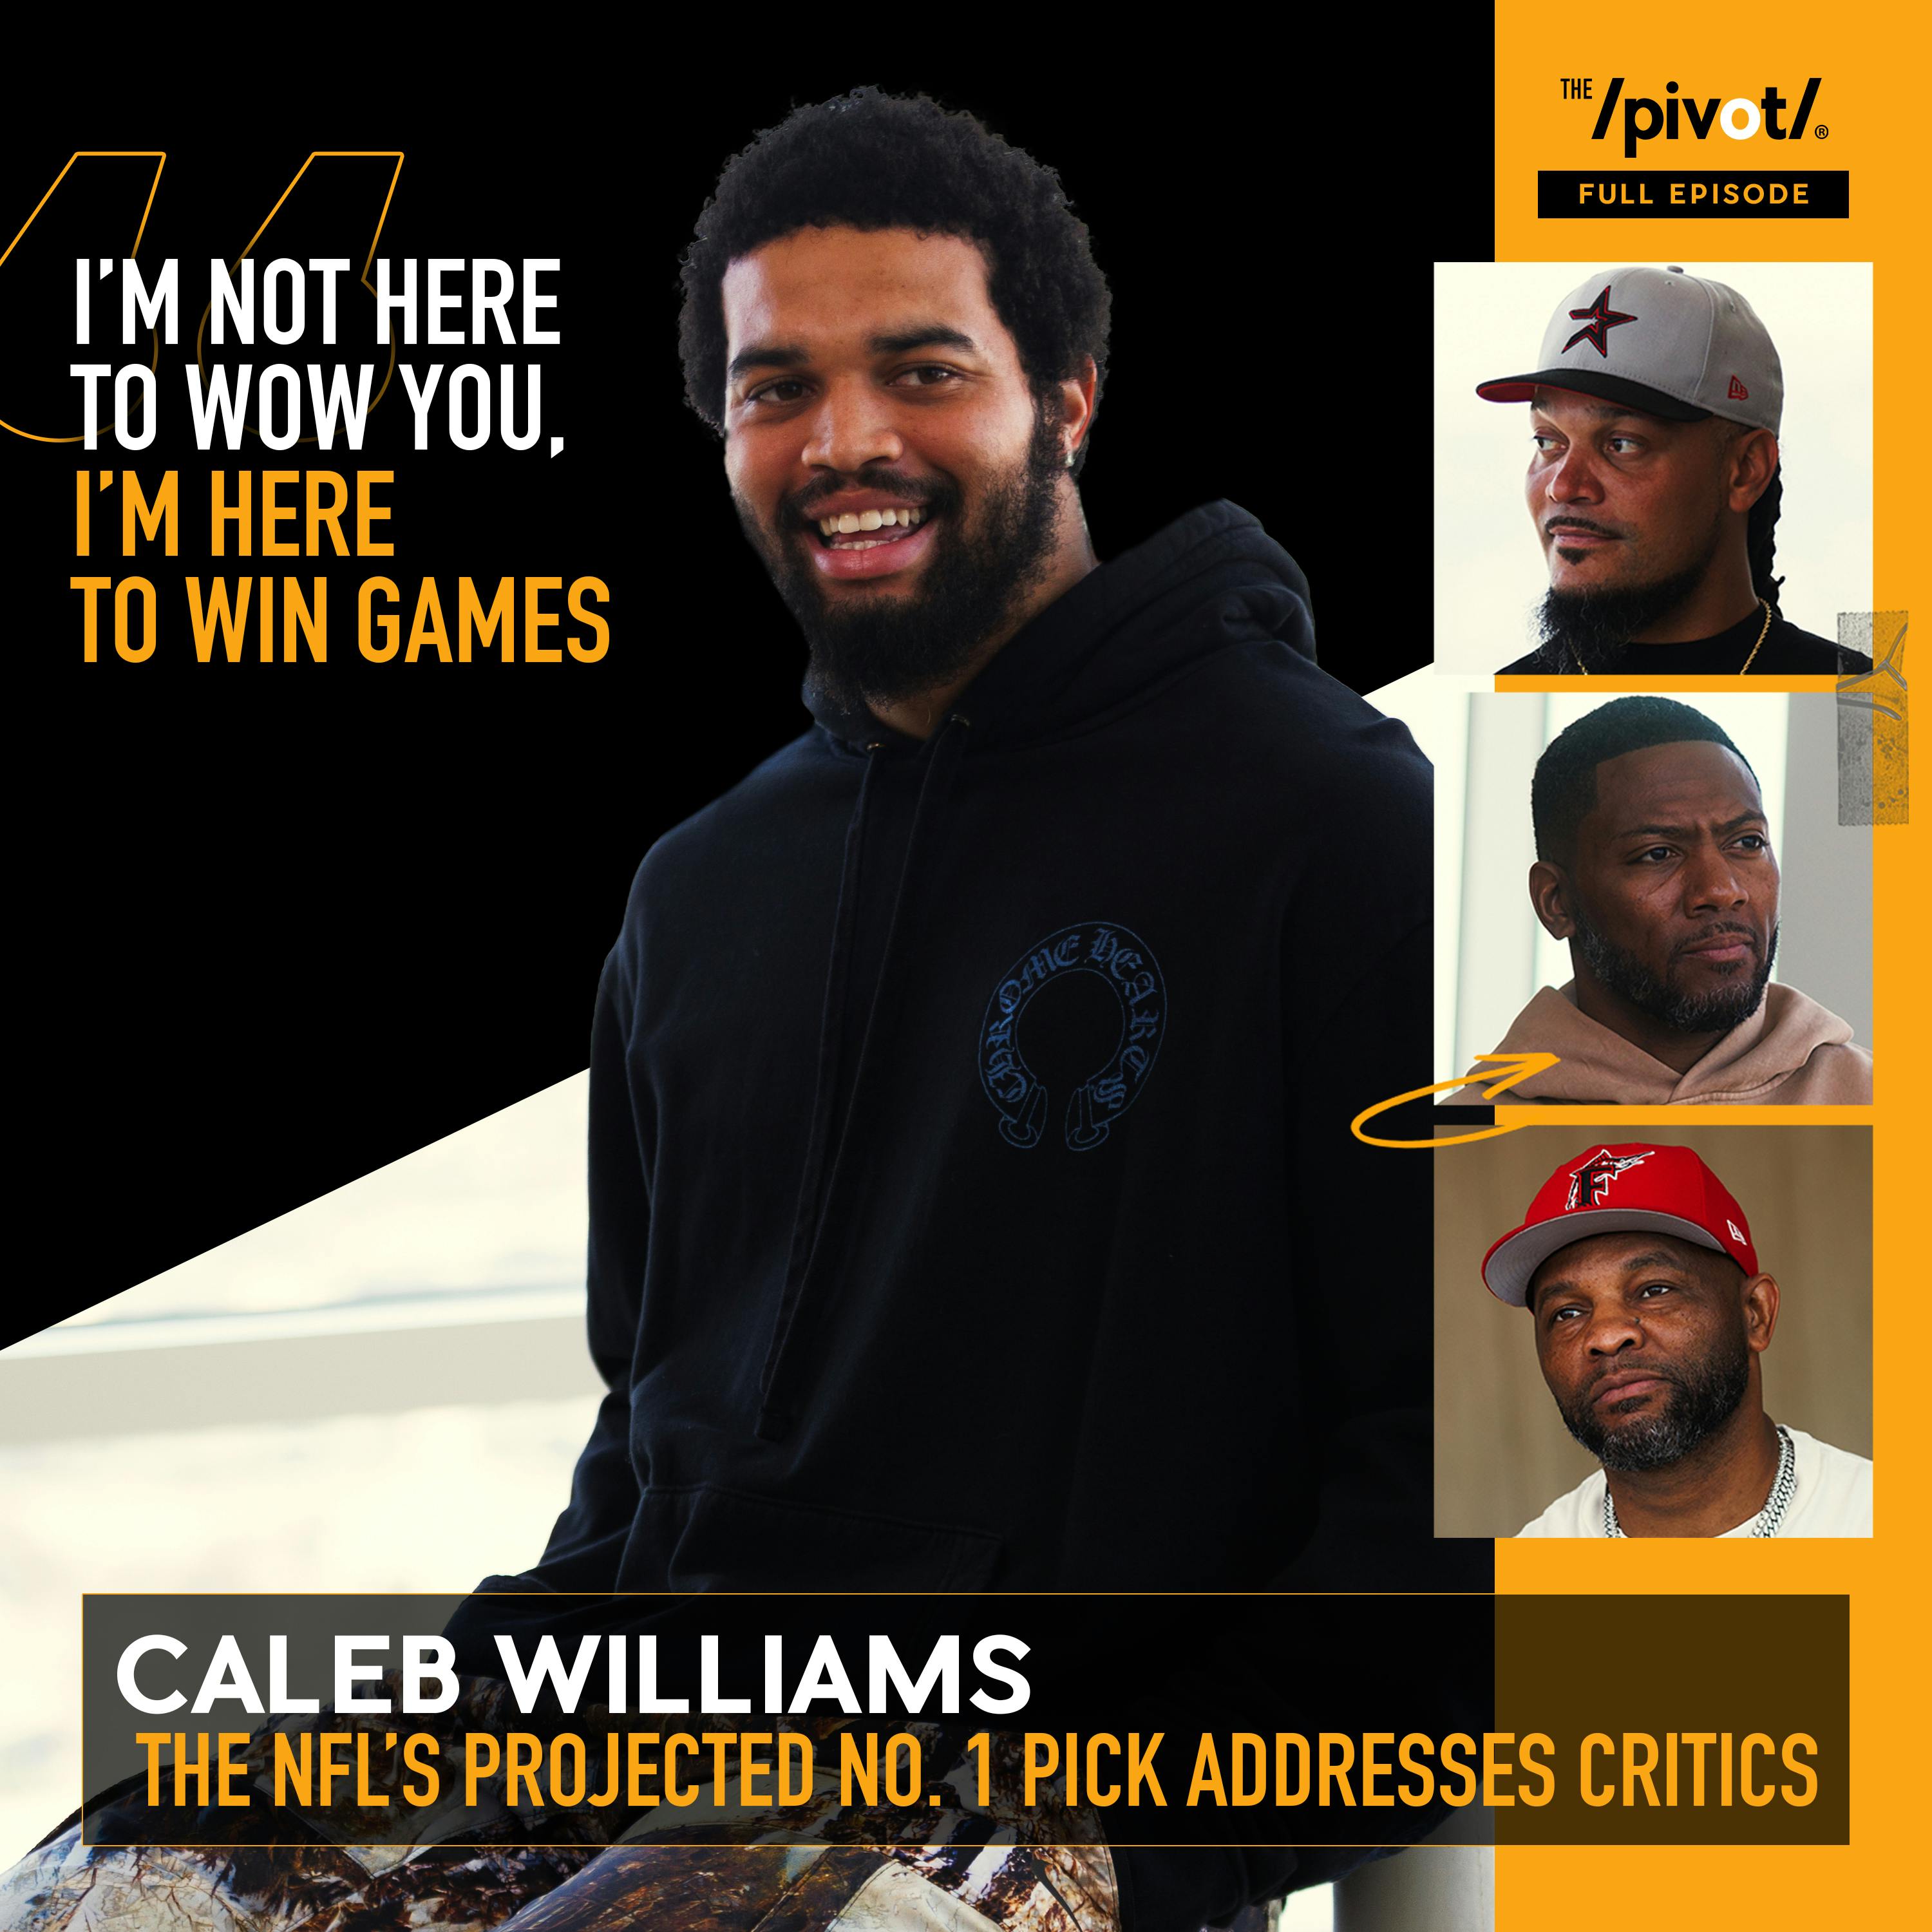 Caleb Williams The NFL's No. 1 Overall Projected Draft Pick talks his football mindset, winning Championships, dealing with critics, hating disrespect, what he looks forward to in Chicago & being a le